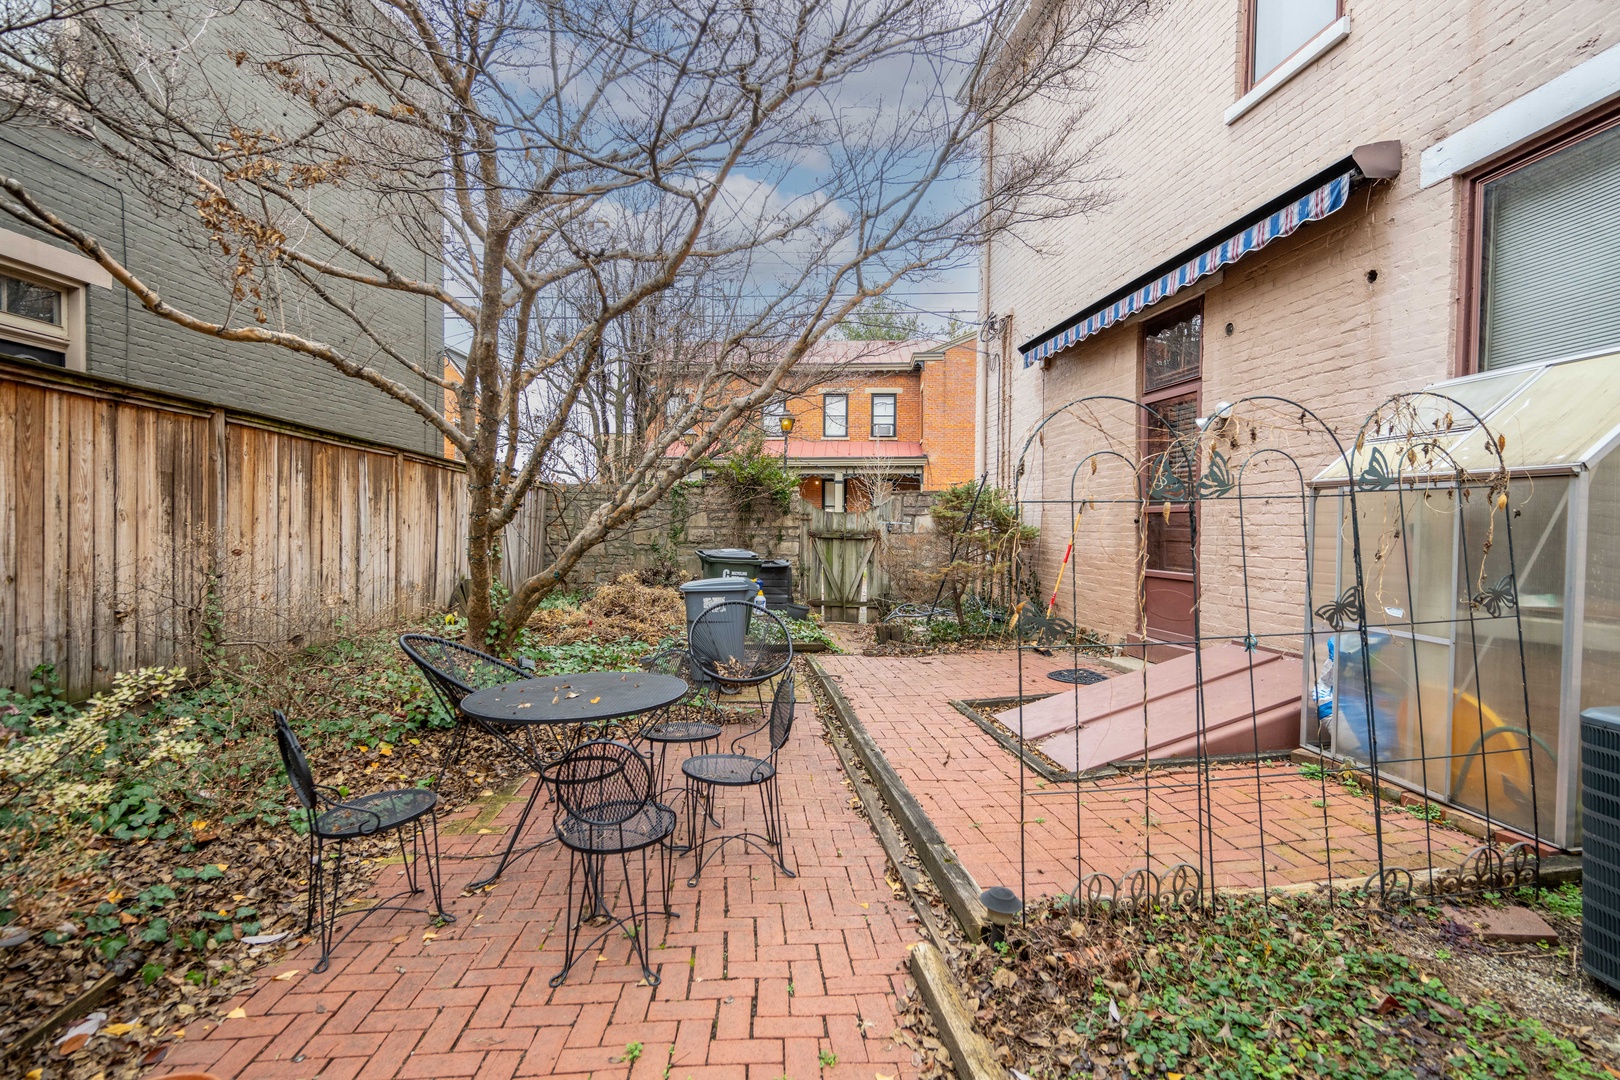 Lounge the day away or dine alfresco on the charming brick patio